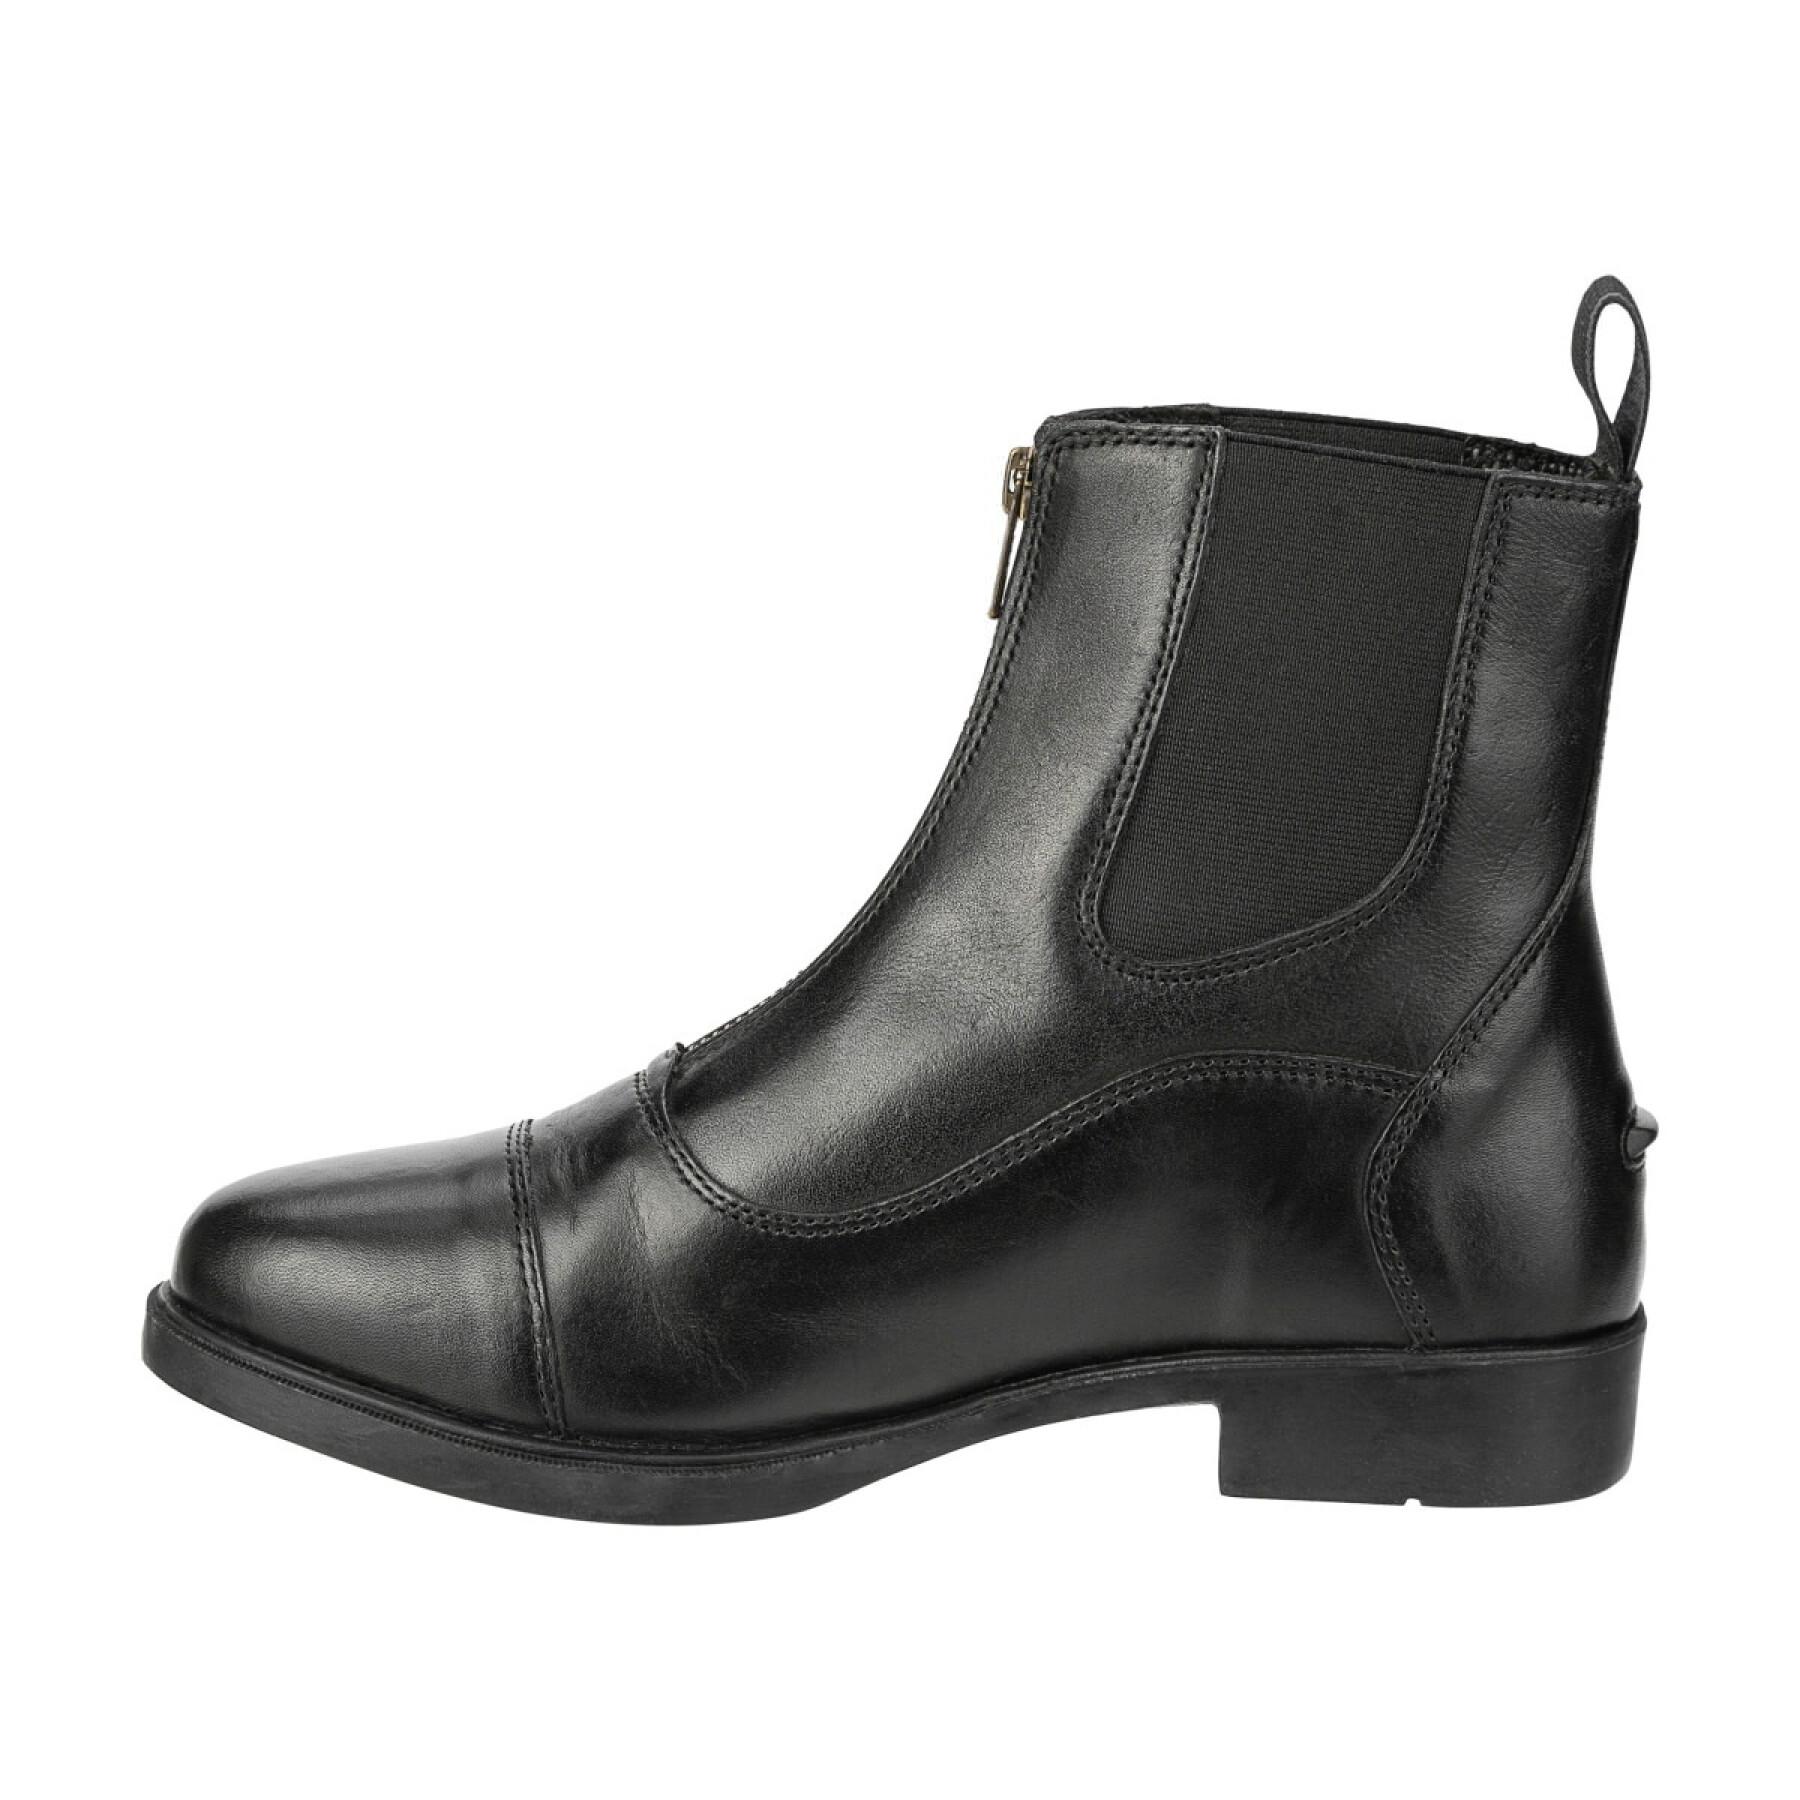 Leather riding boots with front zip Suedwind Footwear Contrace